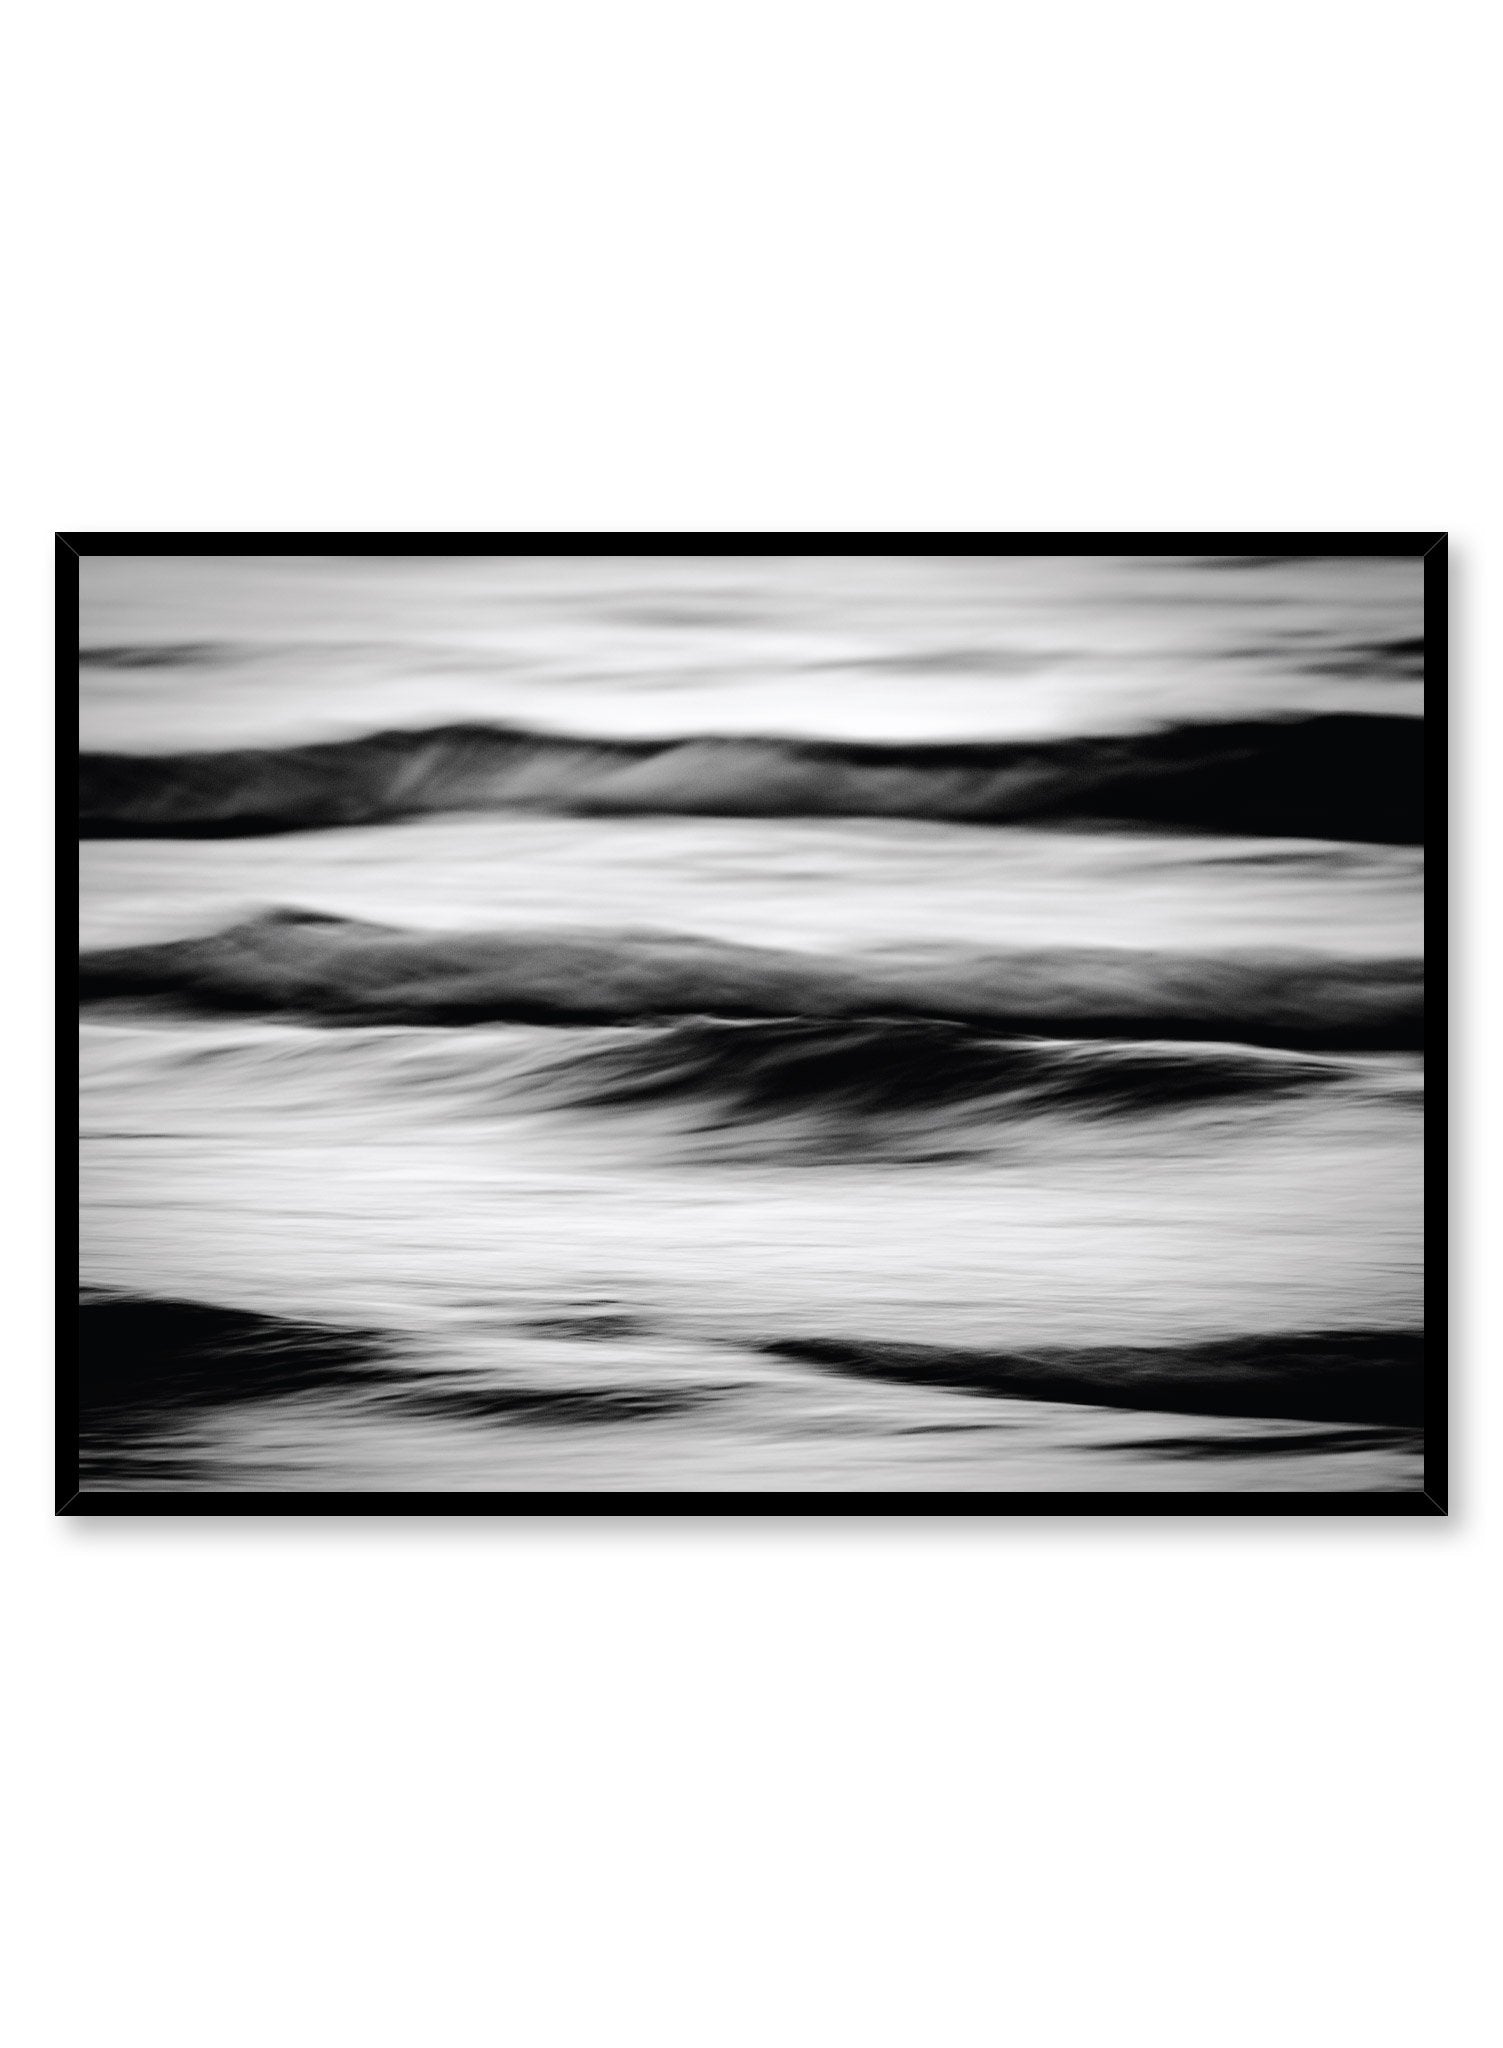 Modern minimalist poster by Opposite Wall with black and white photography of ocean waves